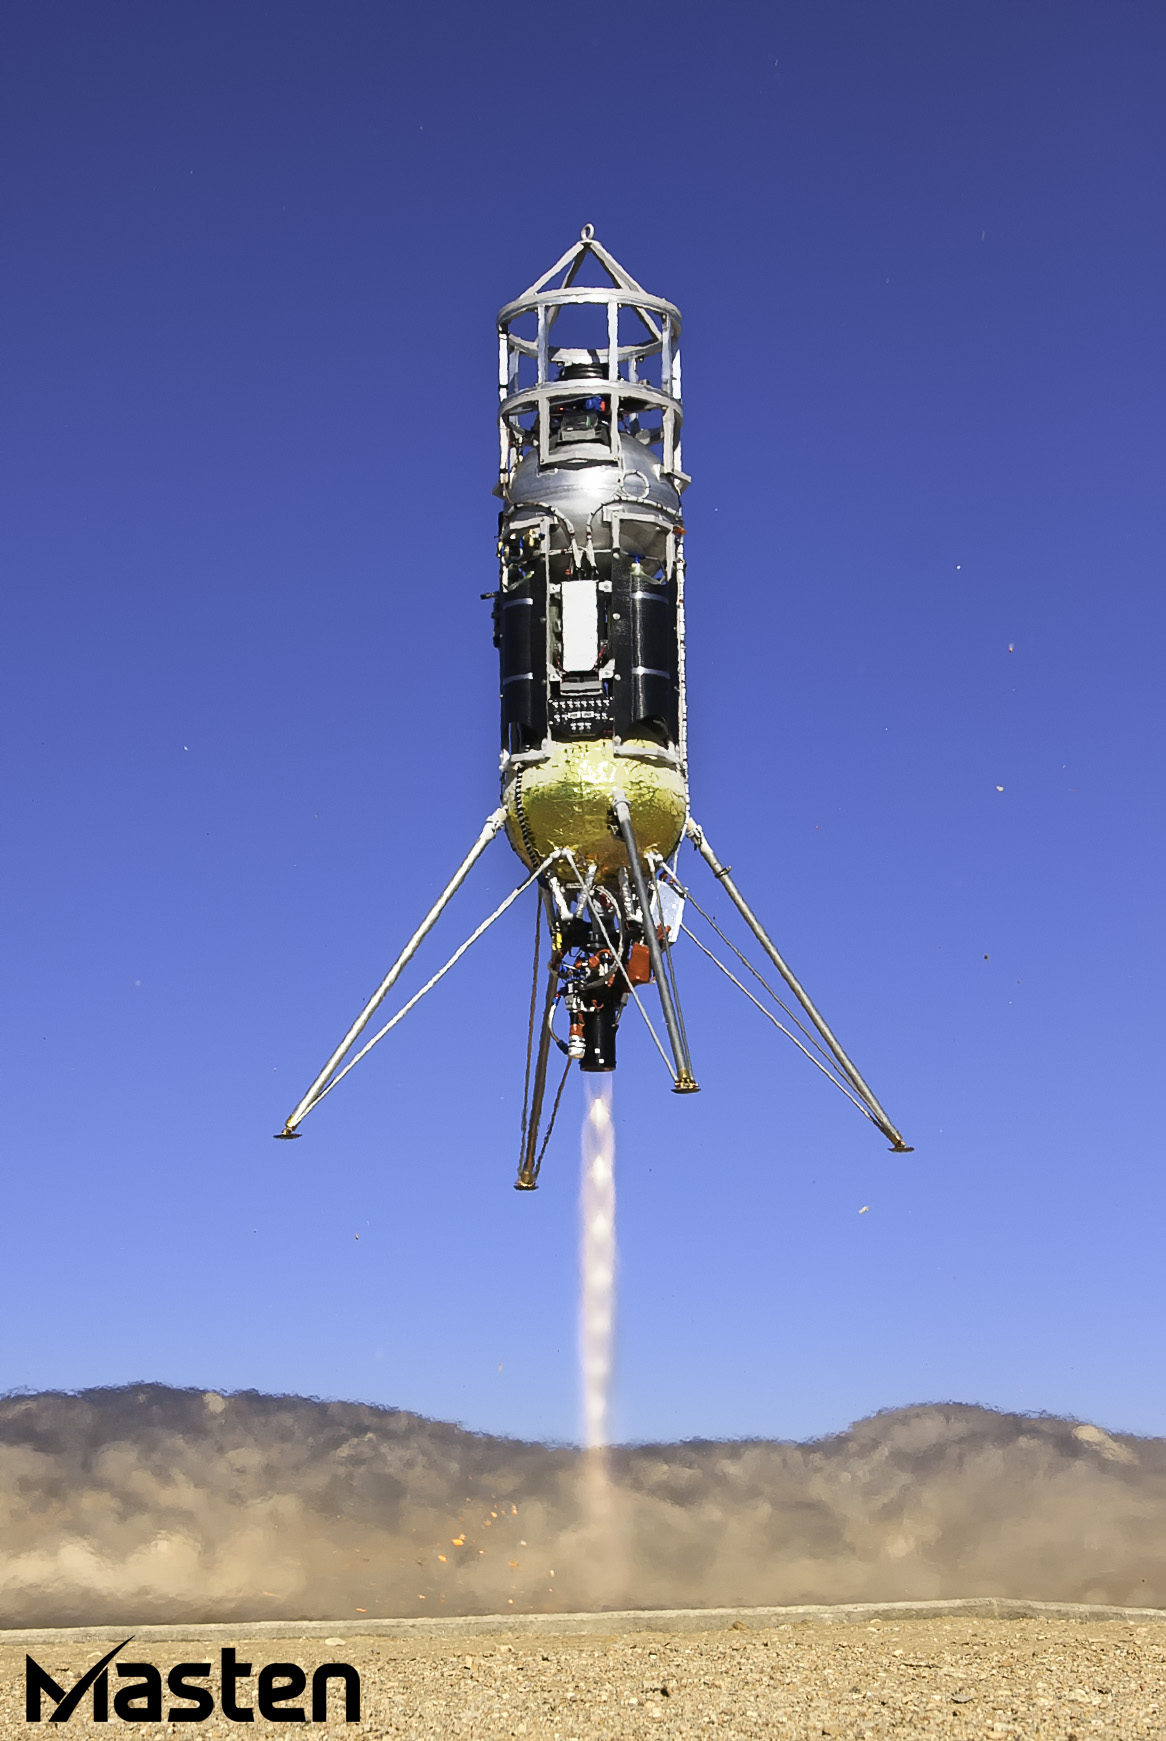 Xodiac is the newest addition to the Masten fleet of Vertical Takeoff Vertical Landing (VTVL) rockets and is the 5th version of this platform. With over a decade of experience in precision rocket land